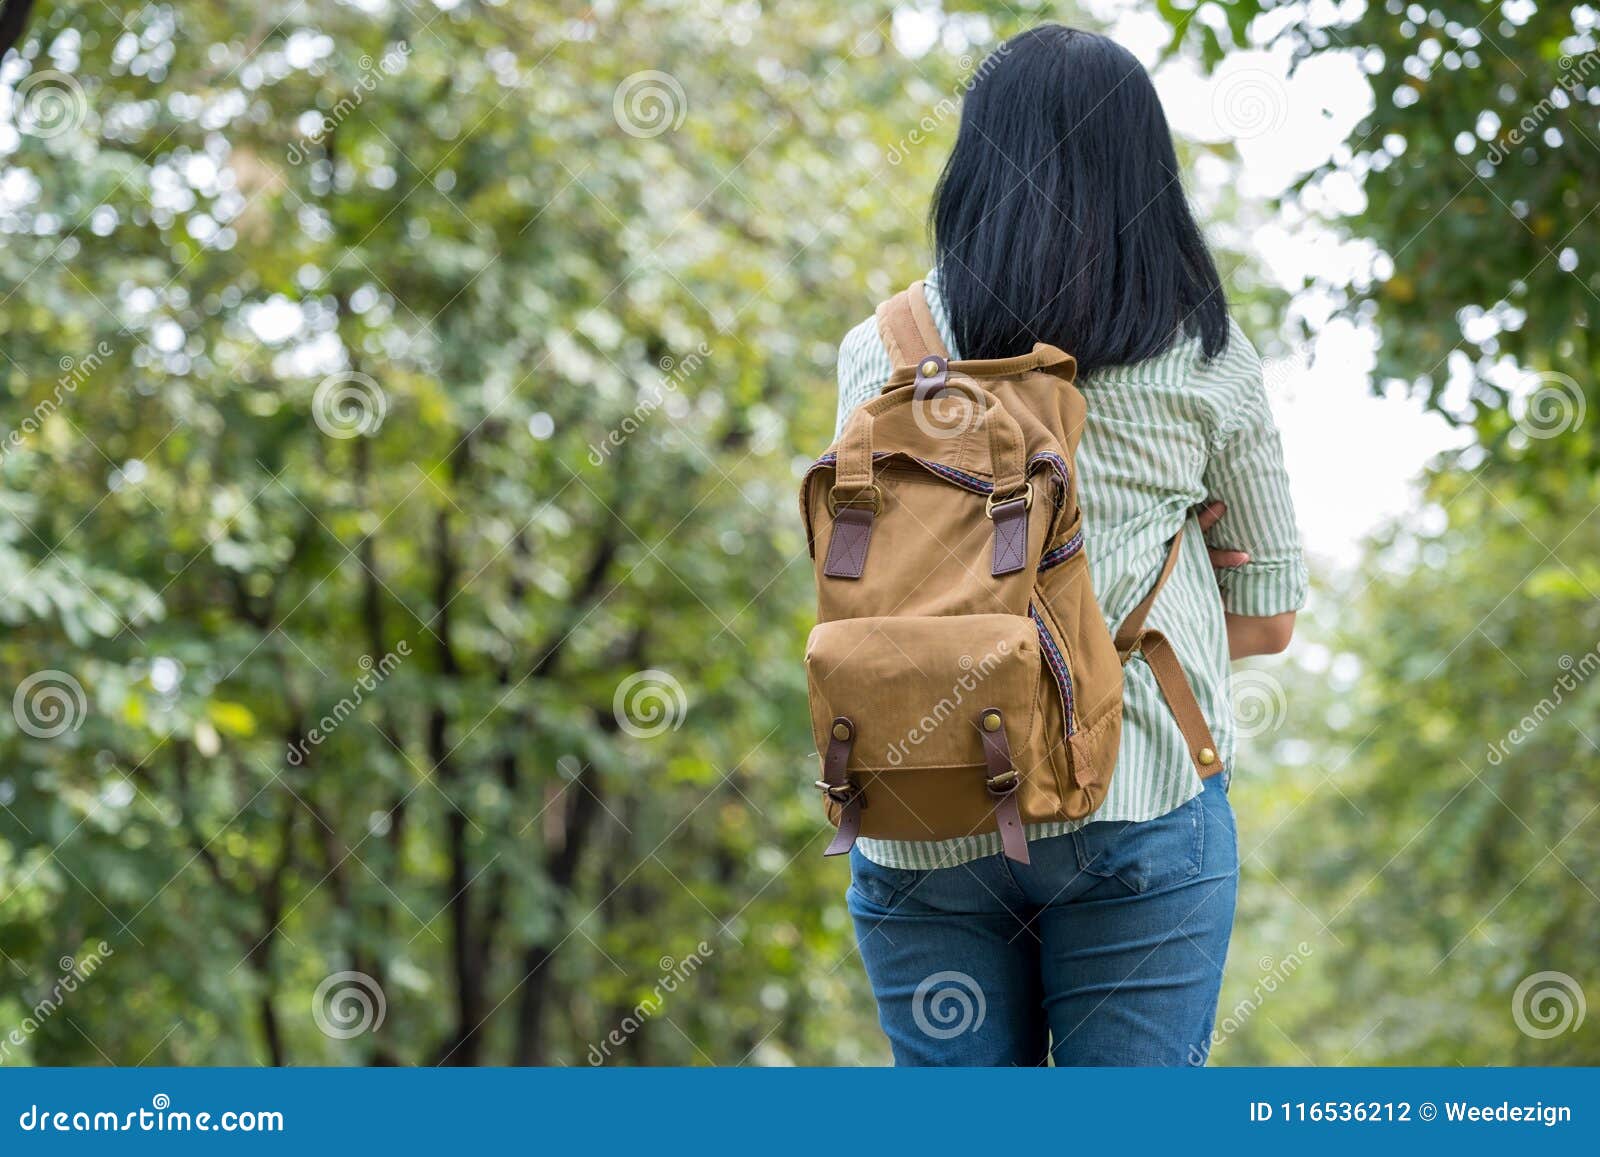 happy young traveler woman backpacker travel in green natural forest ,greenery fresh air,freedom wanderlust concept,alone solo jo